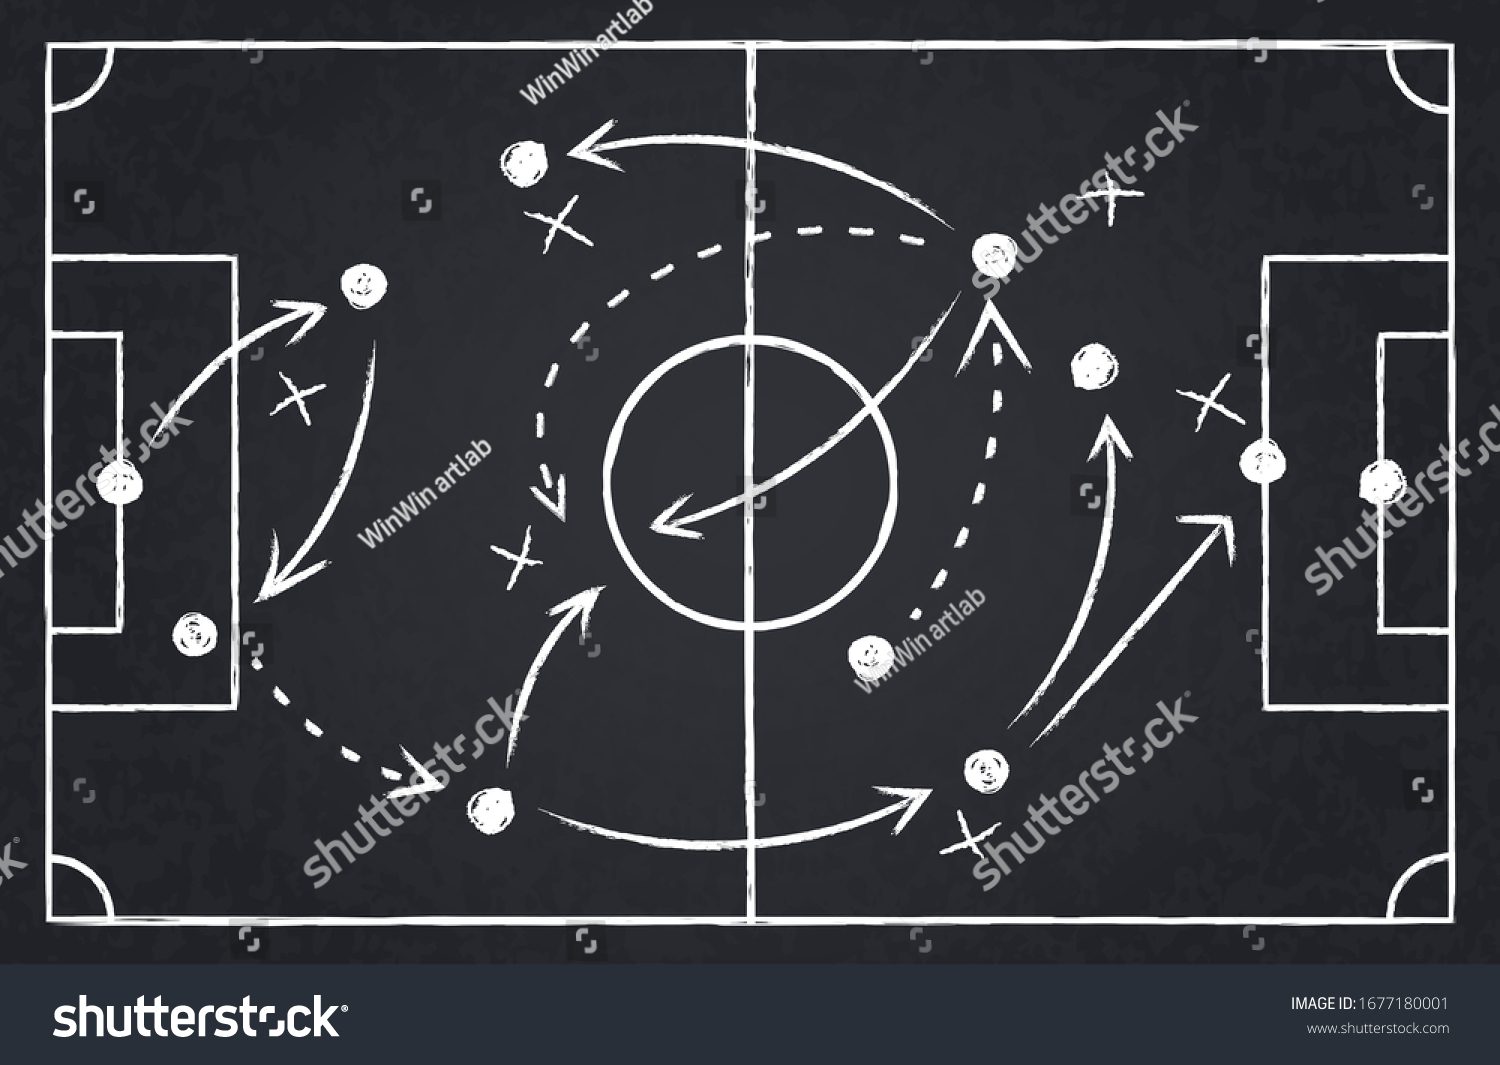 Chalk soccer strategy. Football team strategy and play tactic, soccer cup championship chalkboard game formation vector illustration set. Blackboard and chalkboard, soccer team strategy #1677180001